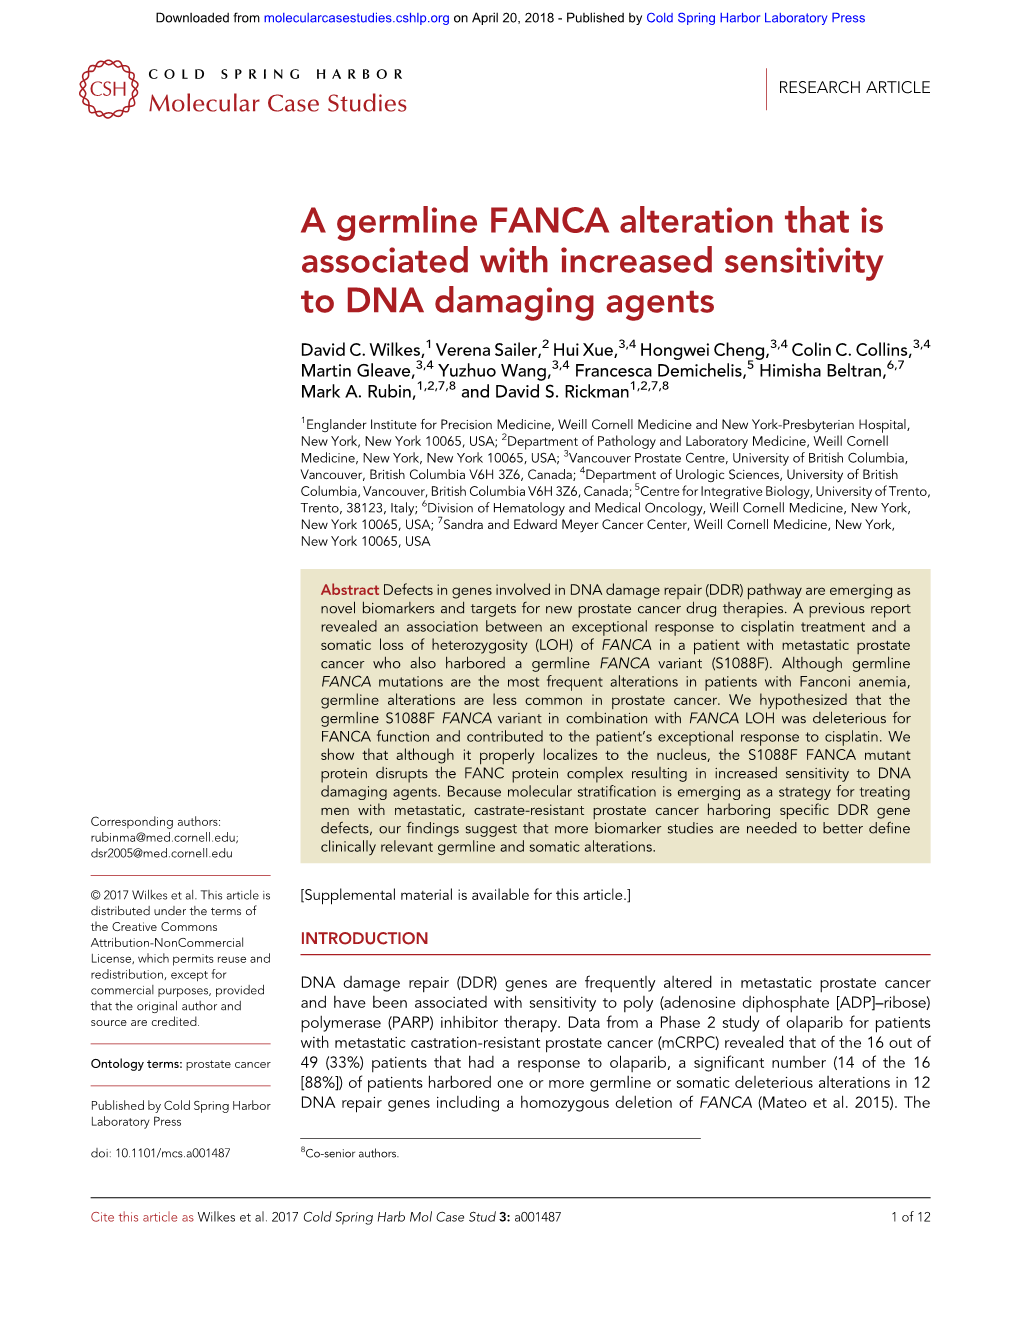 A Germline FANCA Alteration That Is Associated with Increased Sensitivity to DNA Damaging Agents